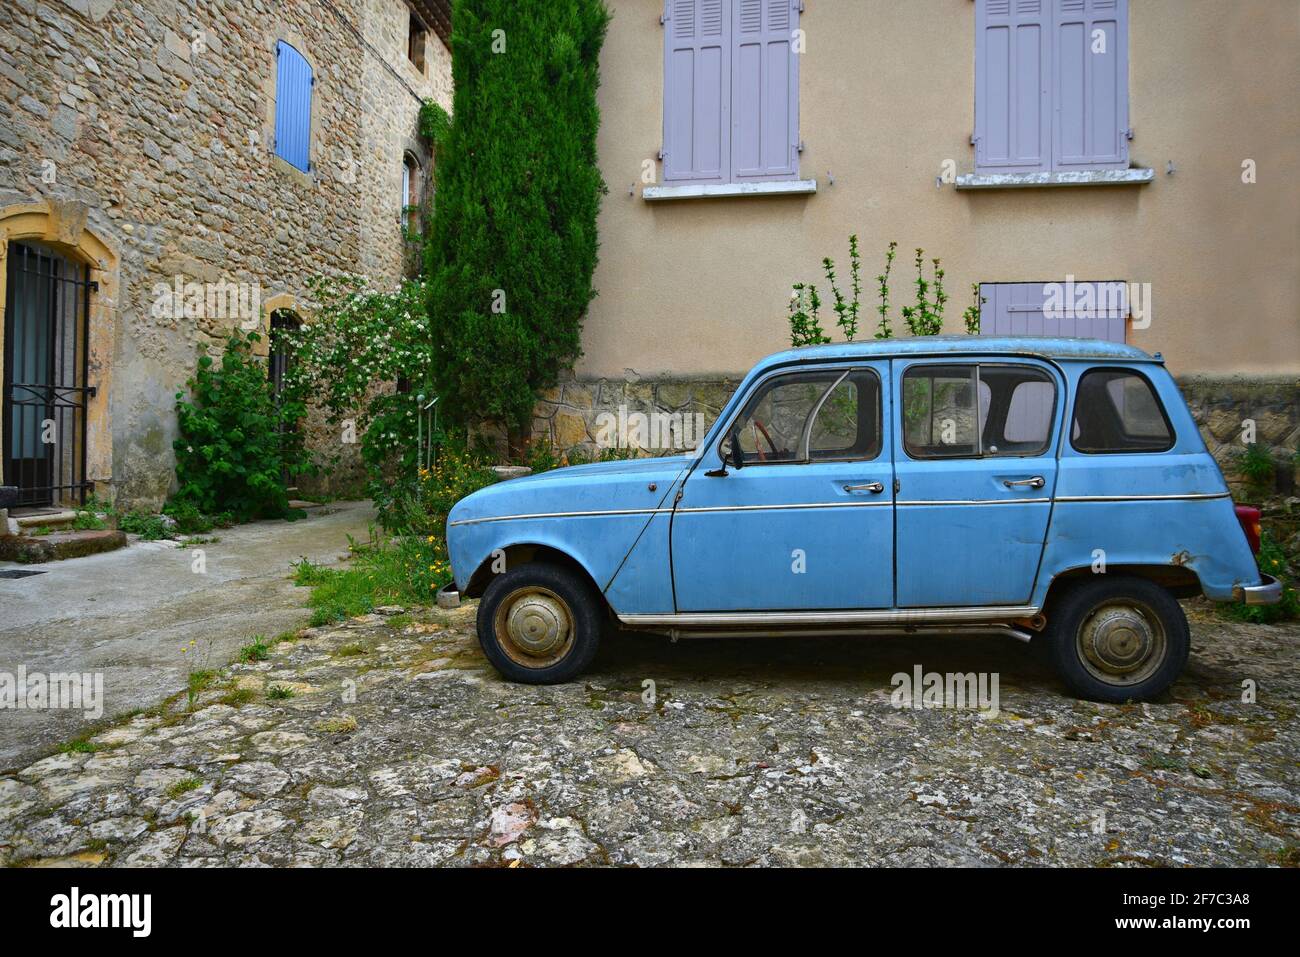 Provençal style house with an antique Renault on the foreground in the picturesque village of Grambois, Provence-Alpes-Côte d'Azur, Vaucluse, France. Stock Photo